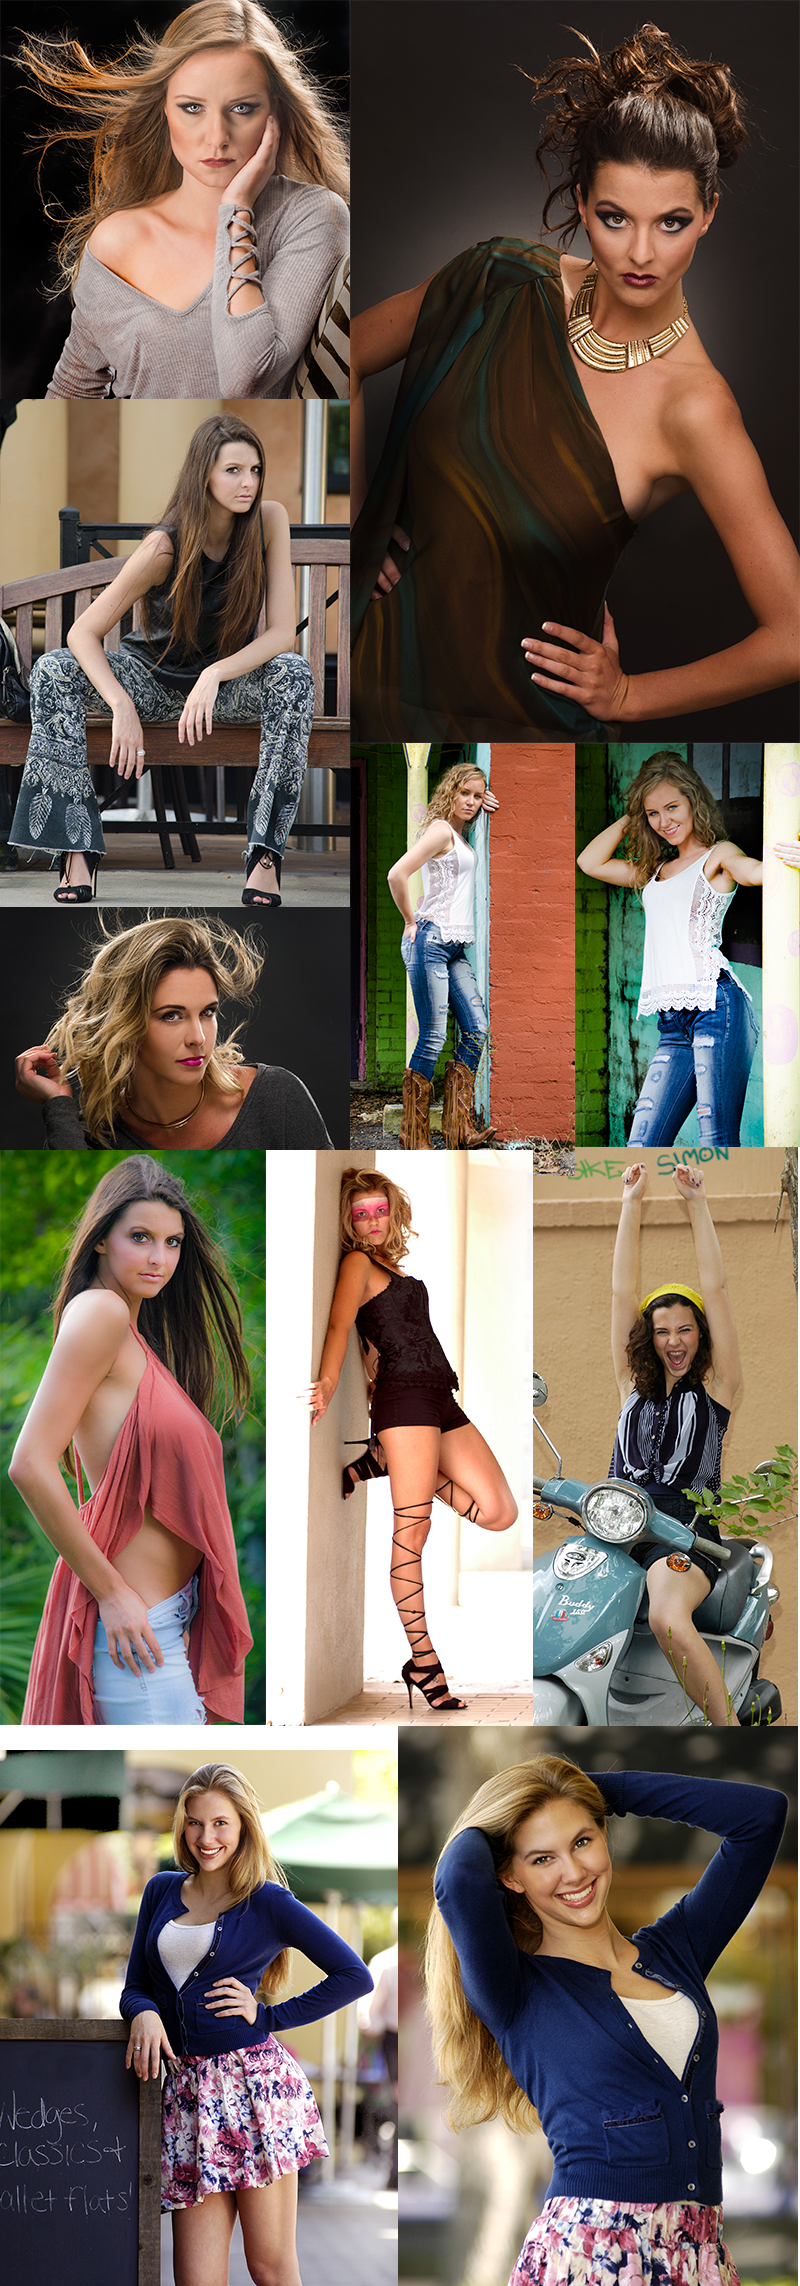 commercial photography models